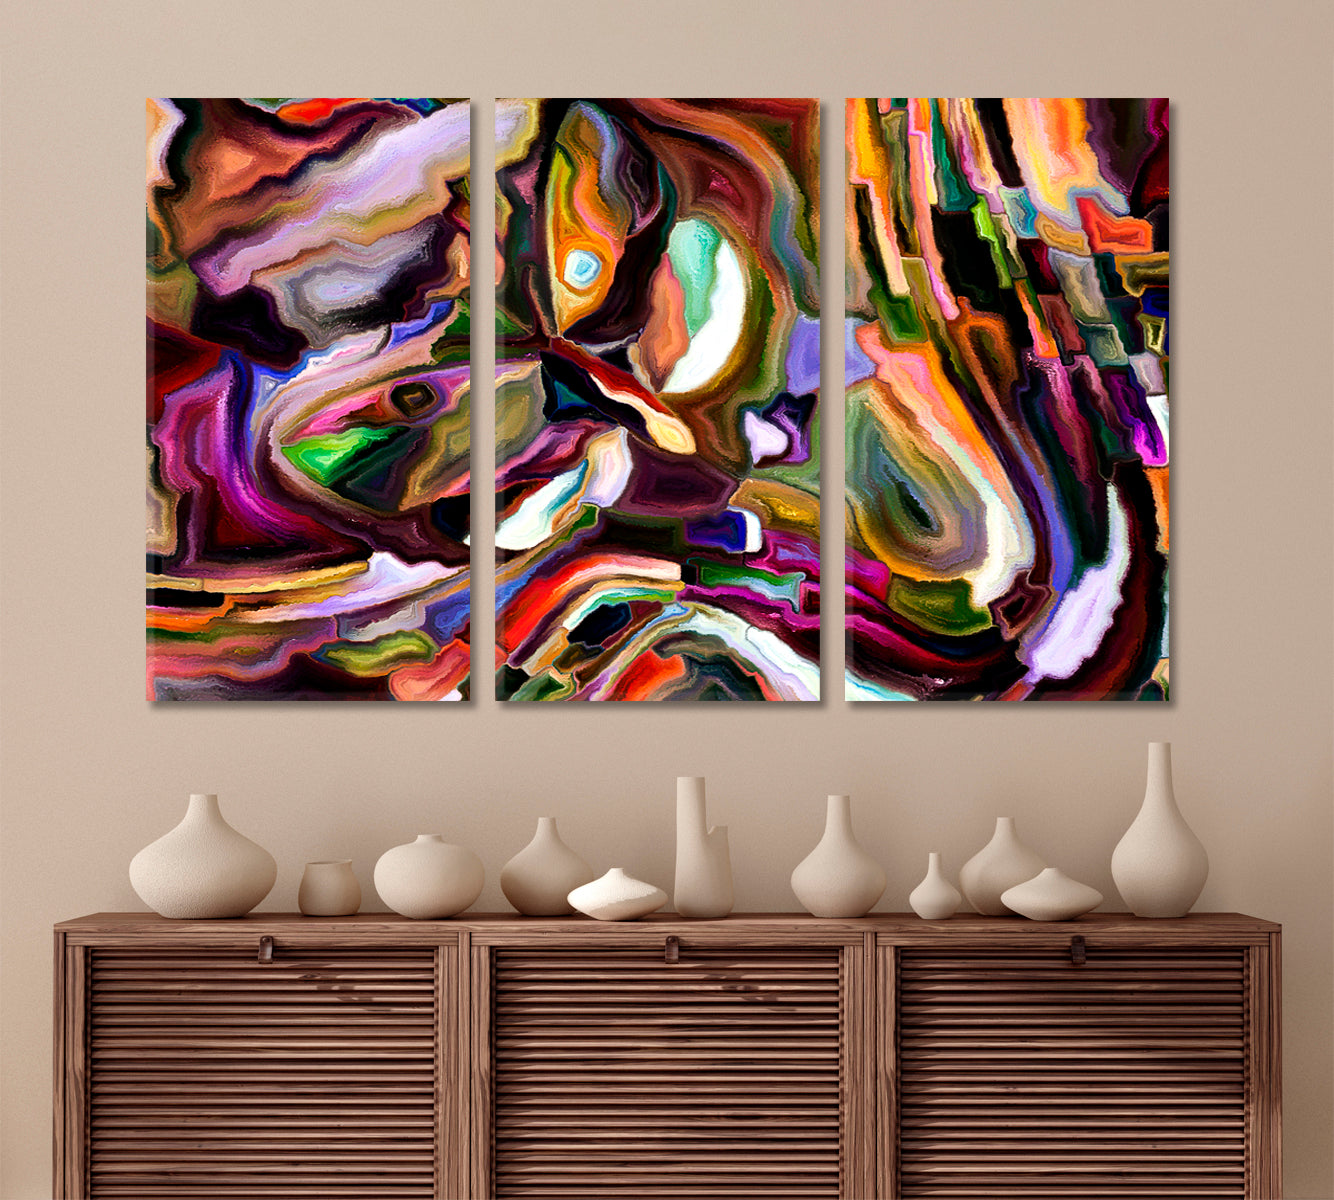 Nature In Colors And Shapes Abstract Pattern Abstract Art Print Artesty 3 panels 36" x 24" 